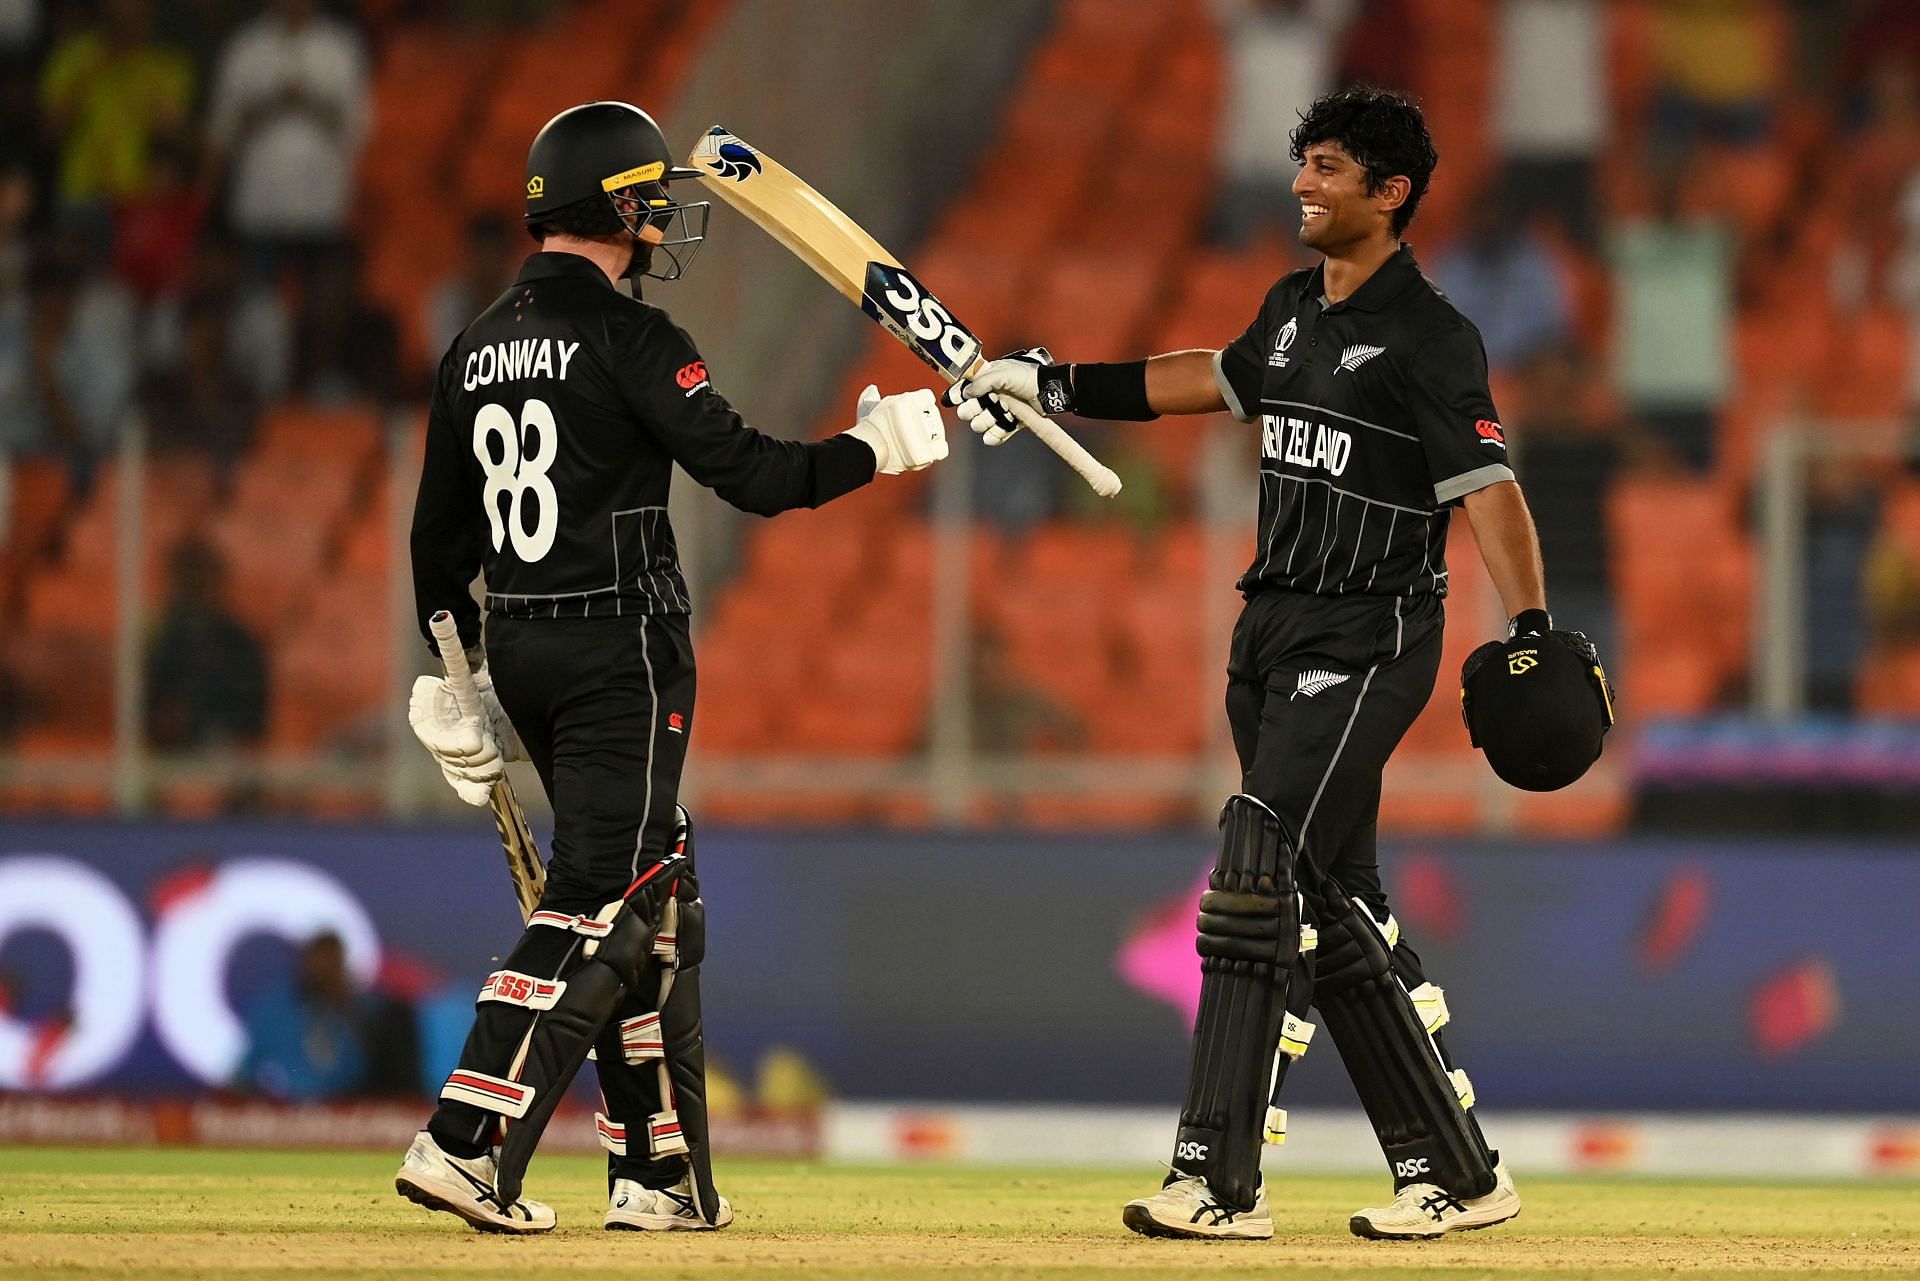 Devon Conway and Rachin Ravindra - the present and future of New Zealand cricket [Getty Images]